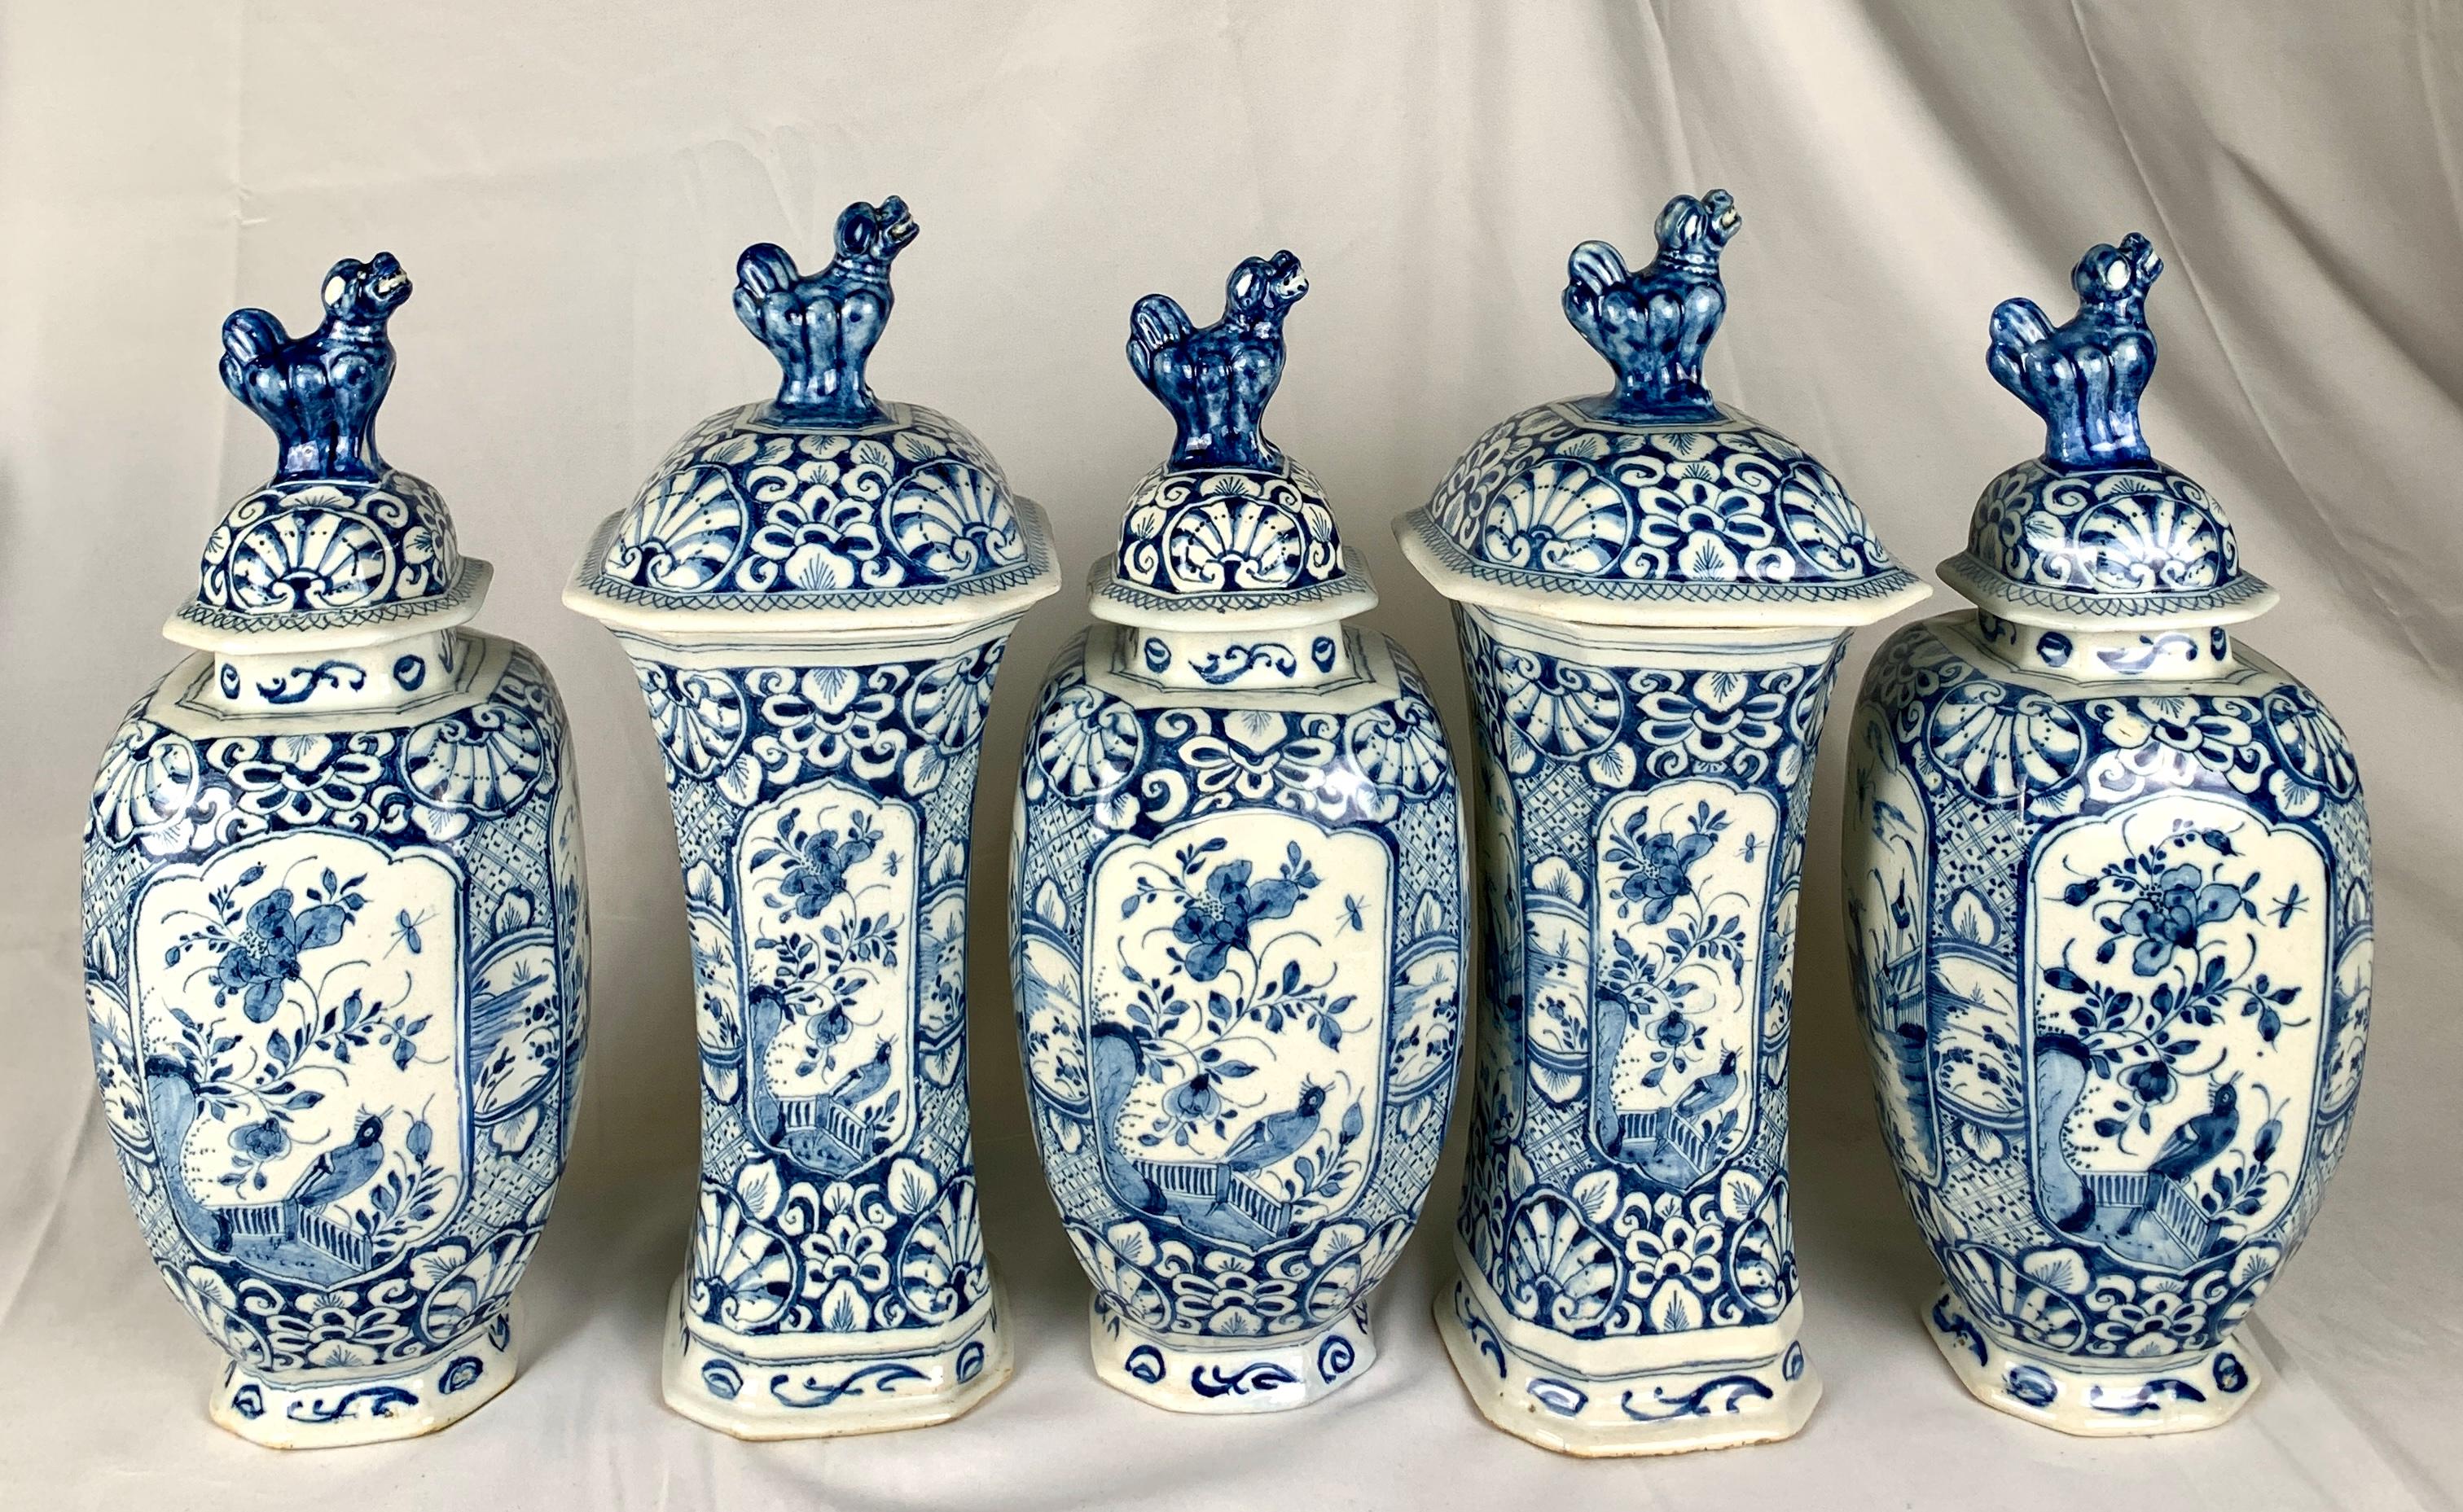 This exquisite blue and white Delft five-piece garniture from mid-18th century Holland, circa 1760, is a masterpiece. The hand-painted panels on the front and back of each jar are decorated with a tranquil scene showing a deer and a butterfly in a